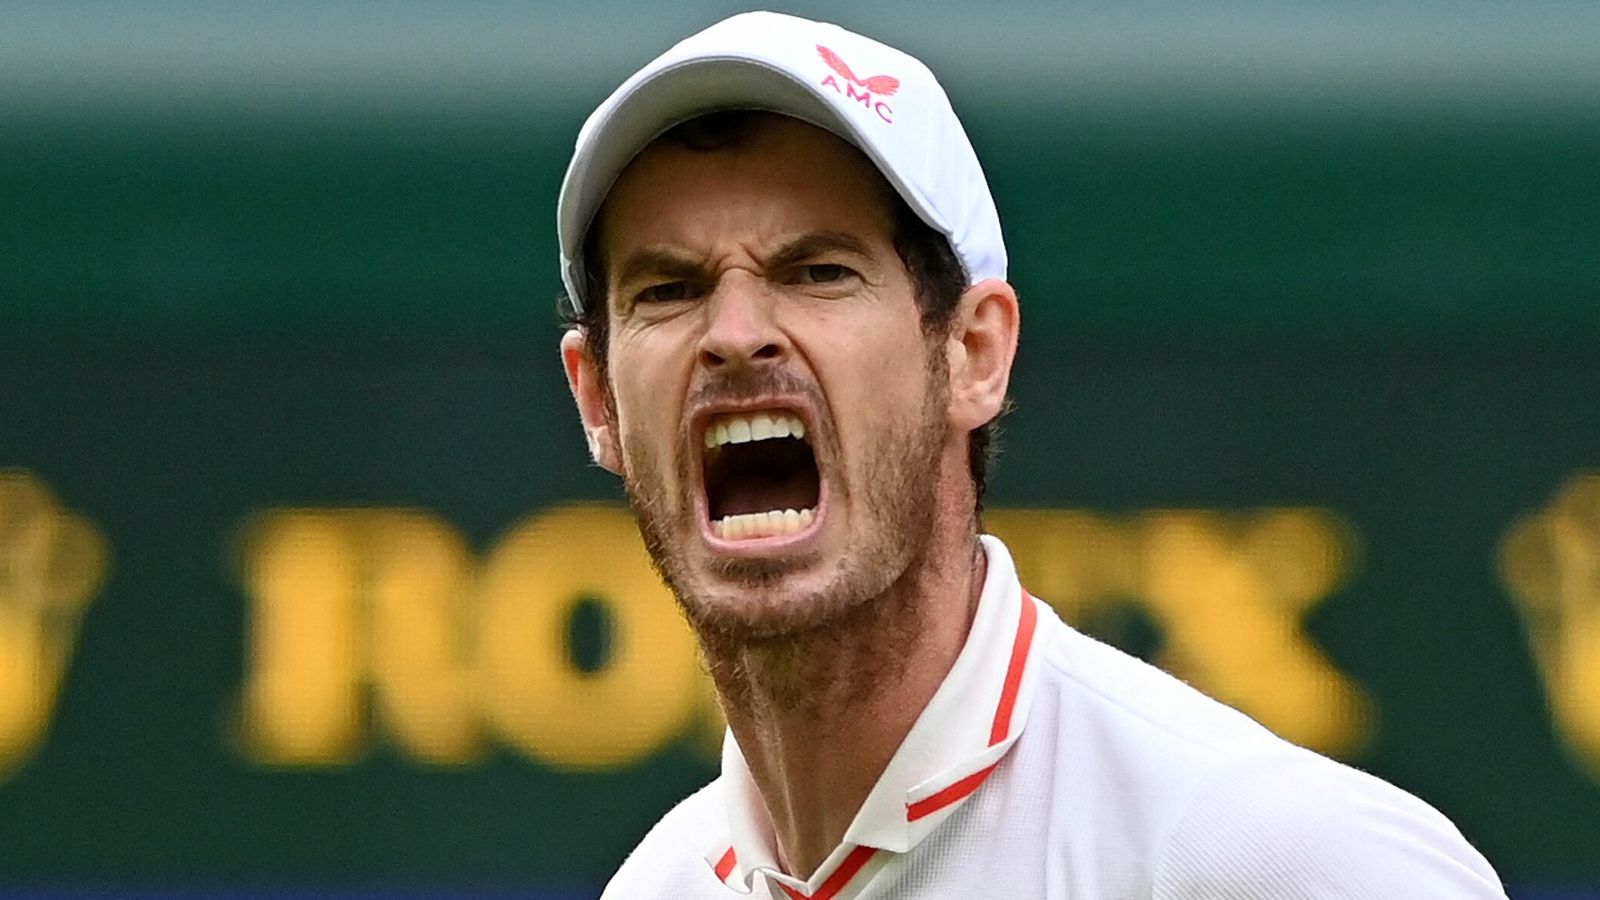 Andy Murray makes winning start to his first Wimbledon singles campaign